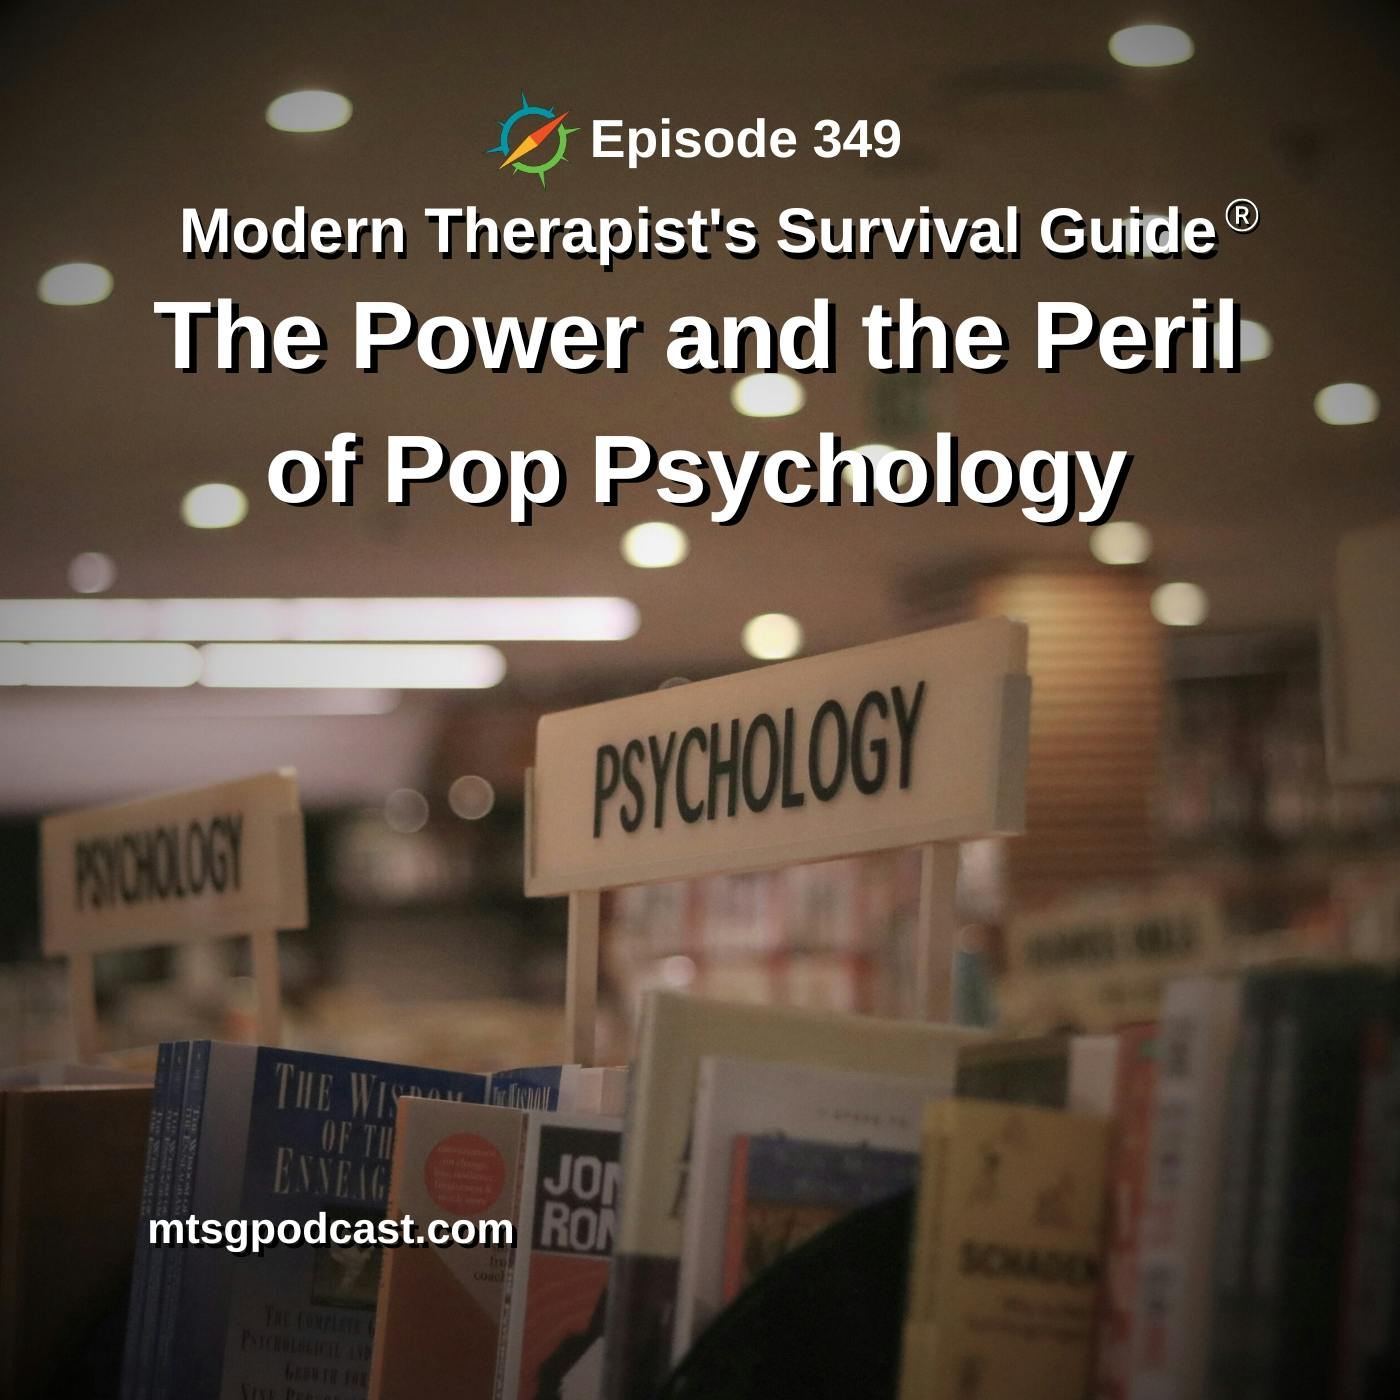 The Power and the Peril of Pop Psychology